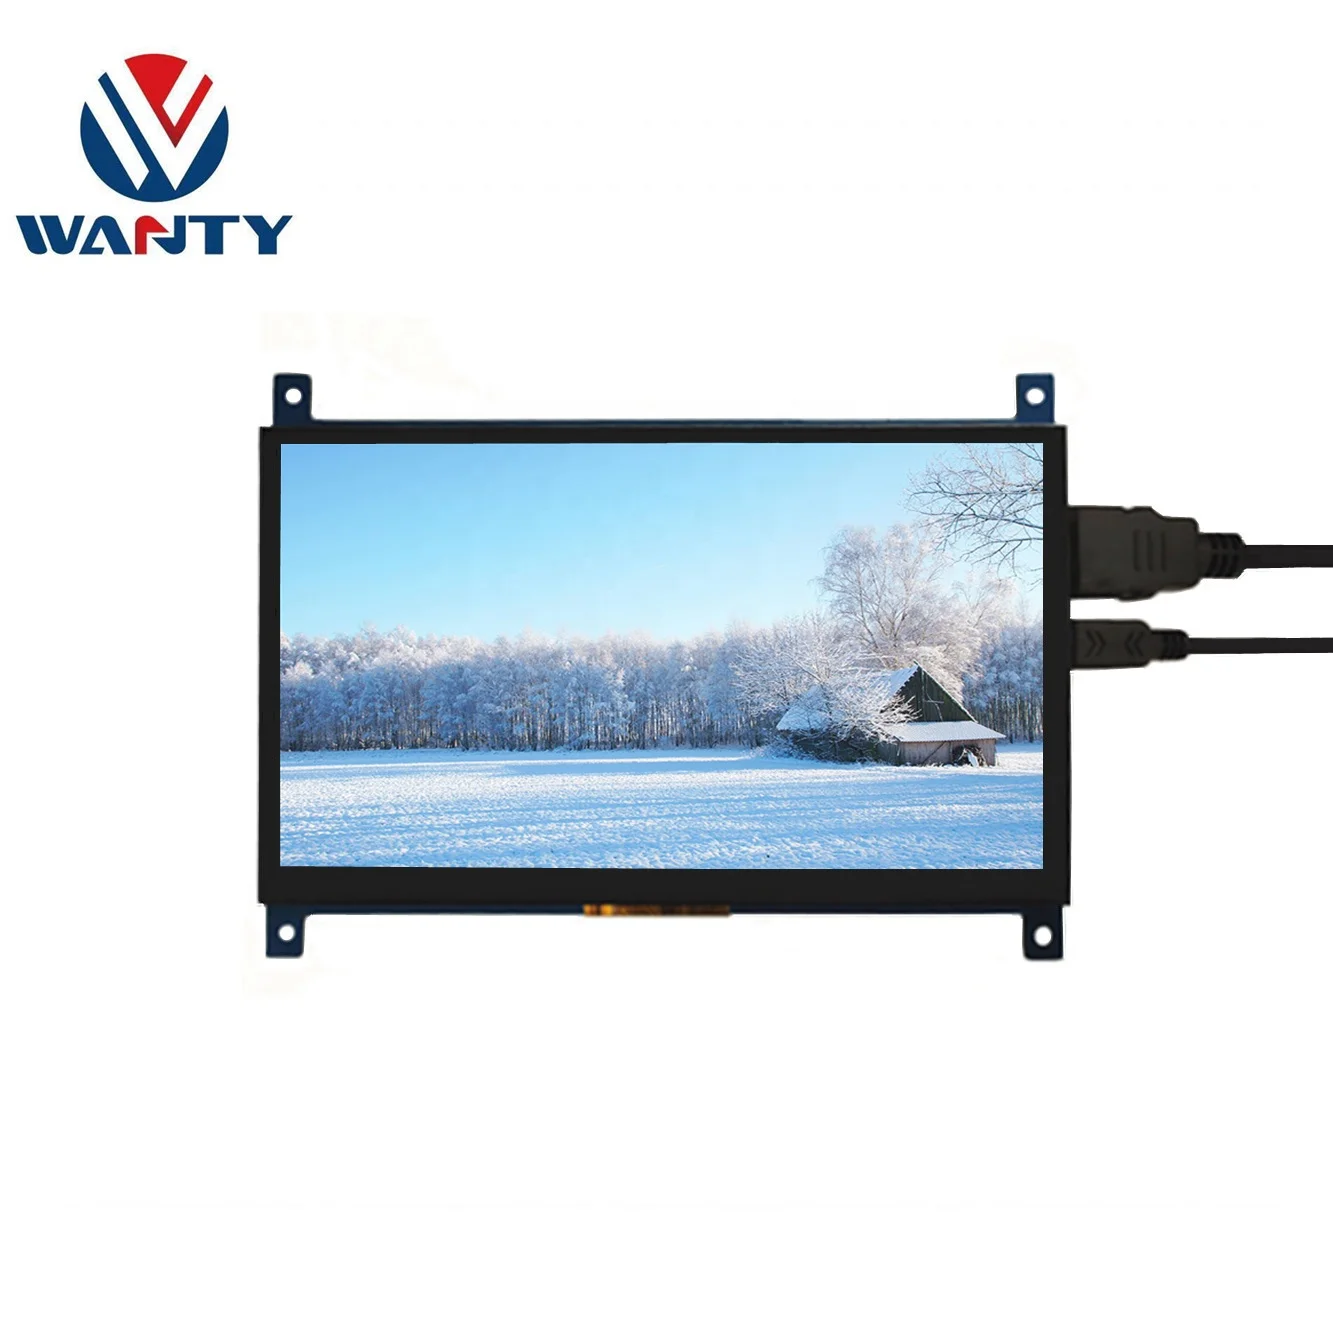 

WANTY 7 Inch 1024x600 TFT LCD IPS Panel Capacitive USB Screen Touch Monitor Raspberry Pi 3 Display